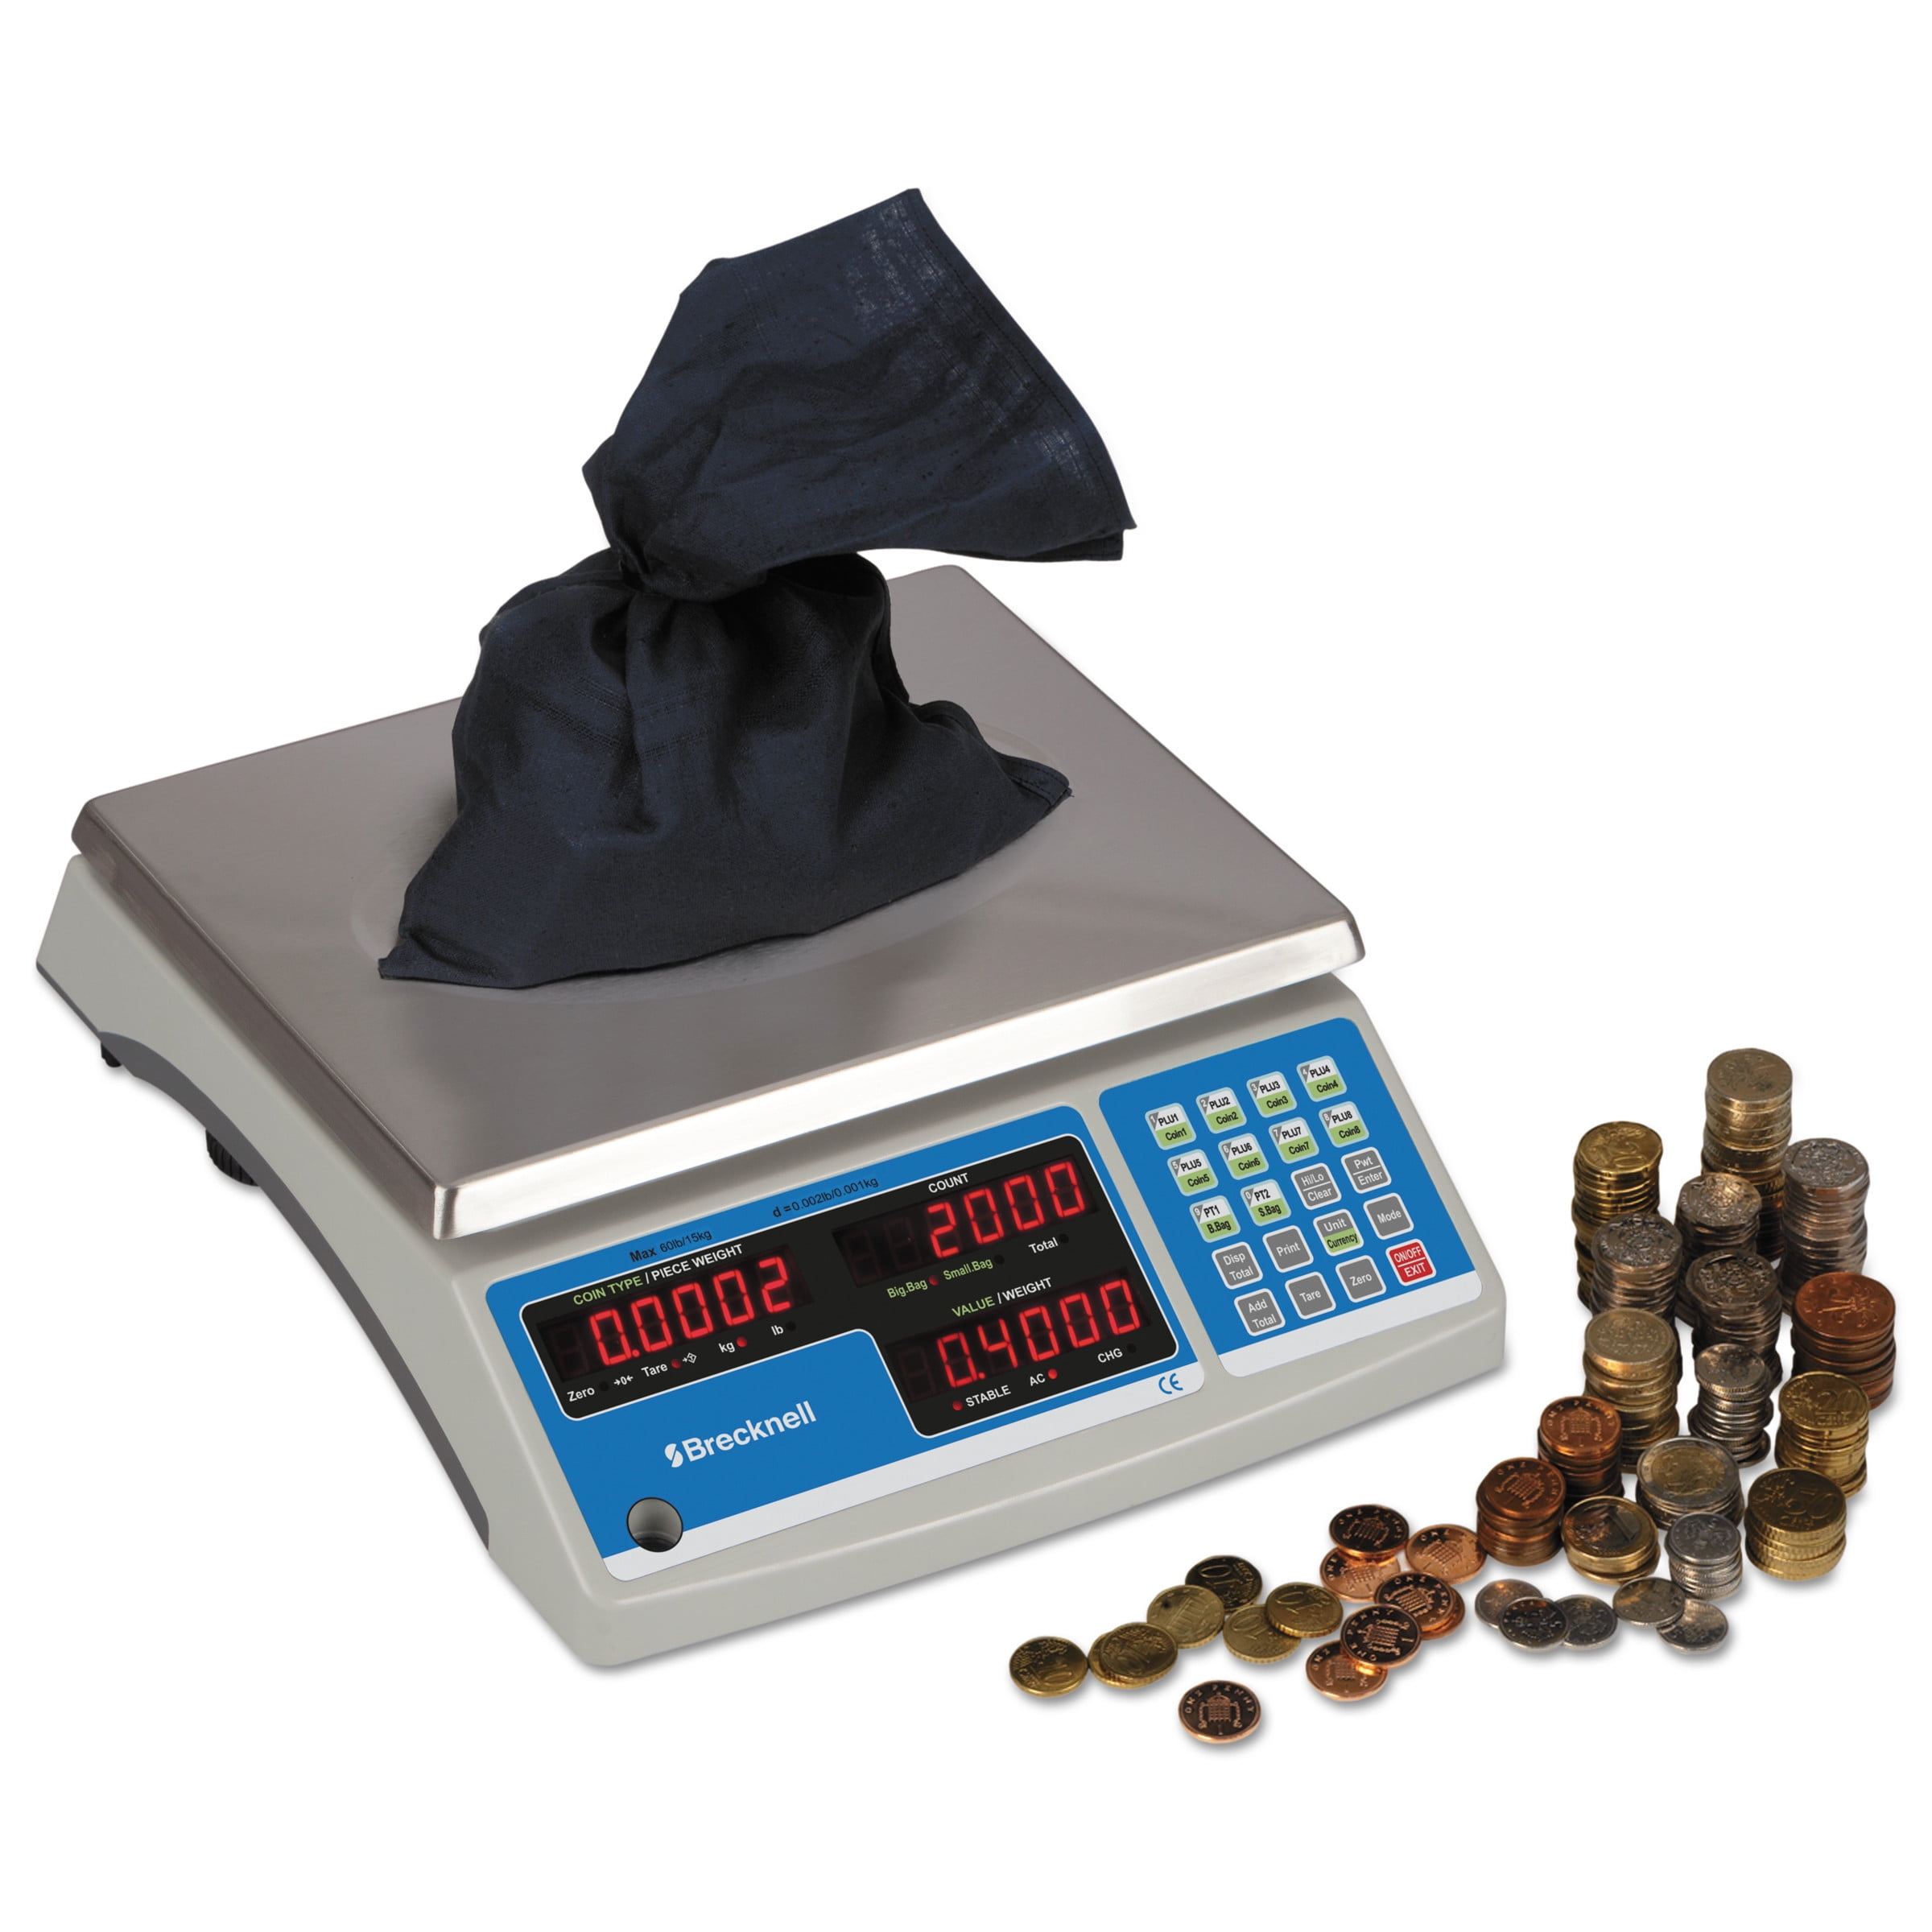 Details about   Frankford Arsenal DS-750 Digital Reloading Scale with LCD Display for Reloading